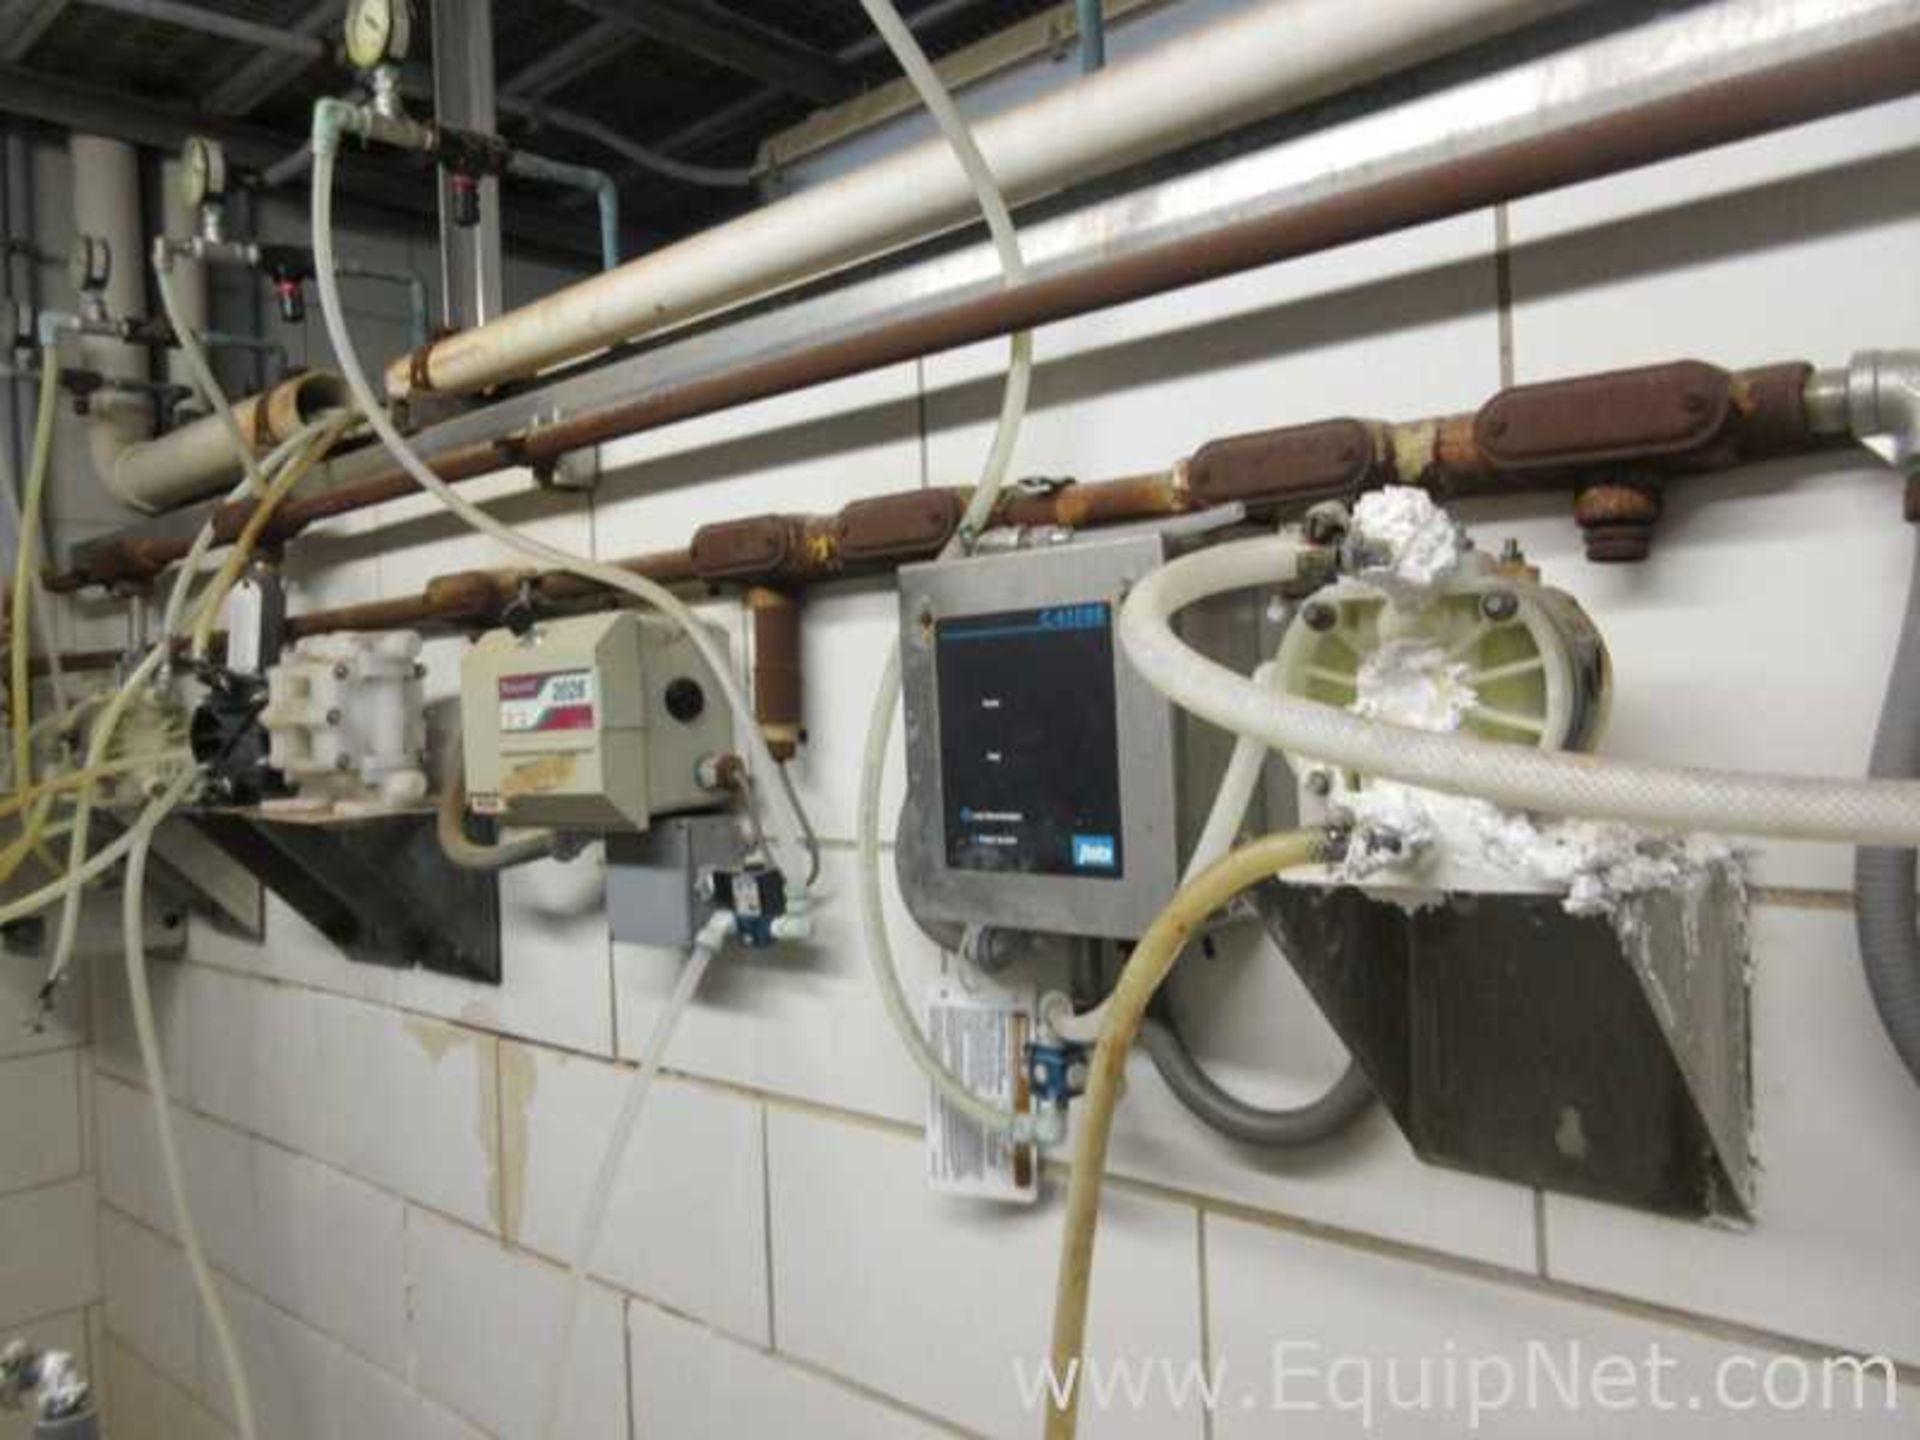 EQUIPNET LISTING #775980; REMOVAL COST: $15,754.00; DESCRIPTION: CIP System With Three Tanks, - Image 15 of 17